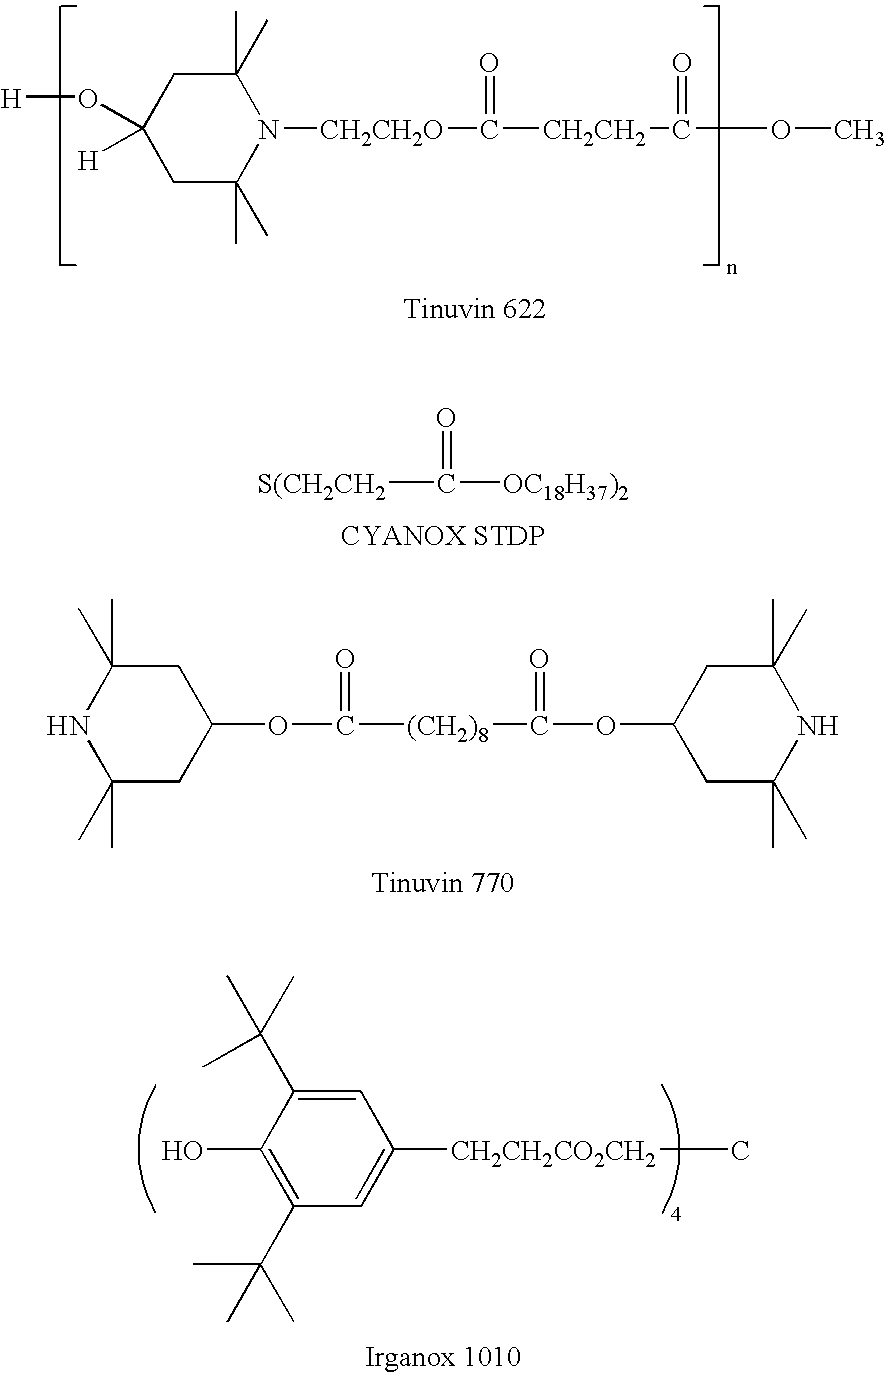 Self limiting catalyst composition and propylene polymerization process